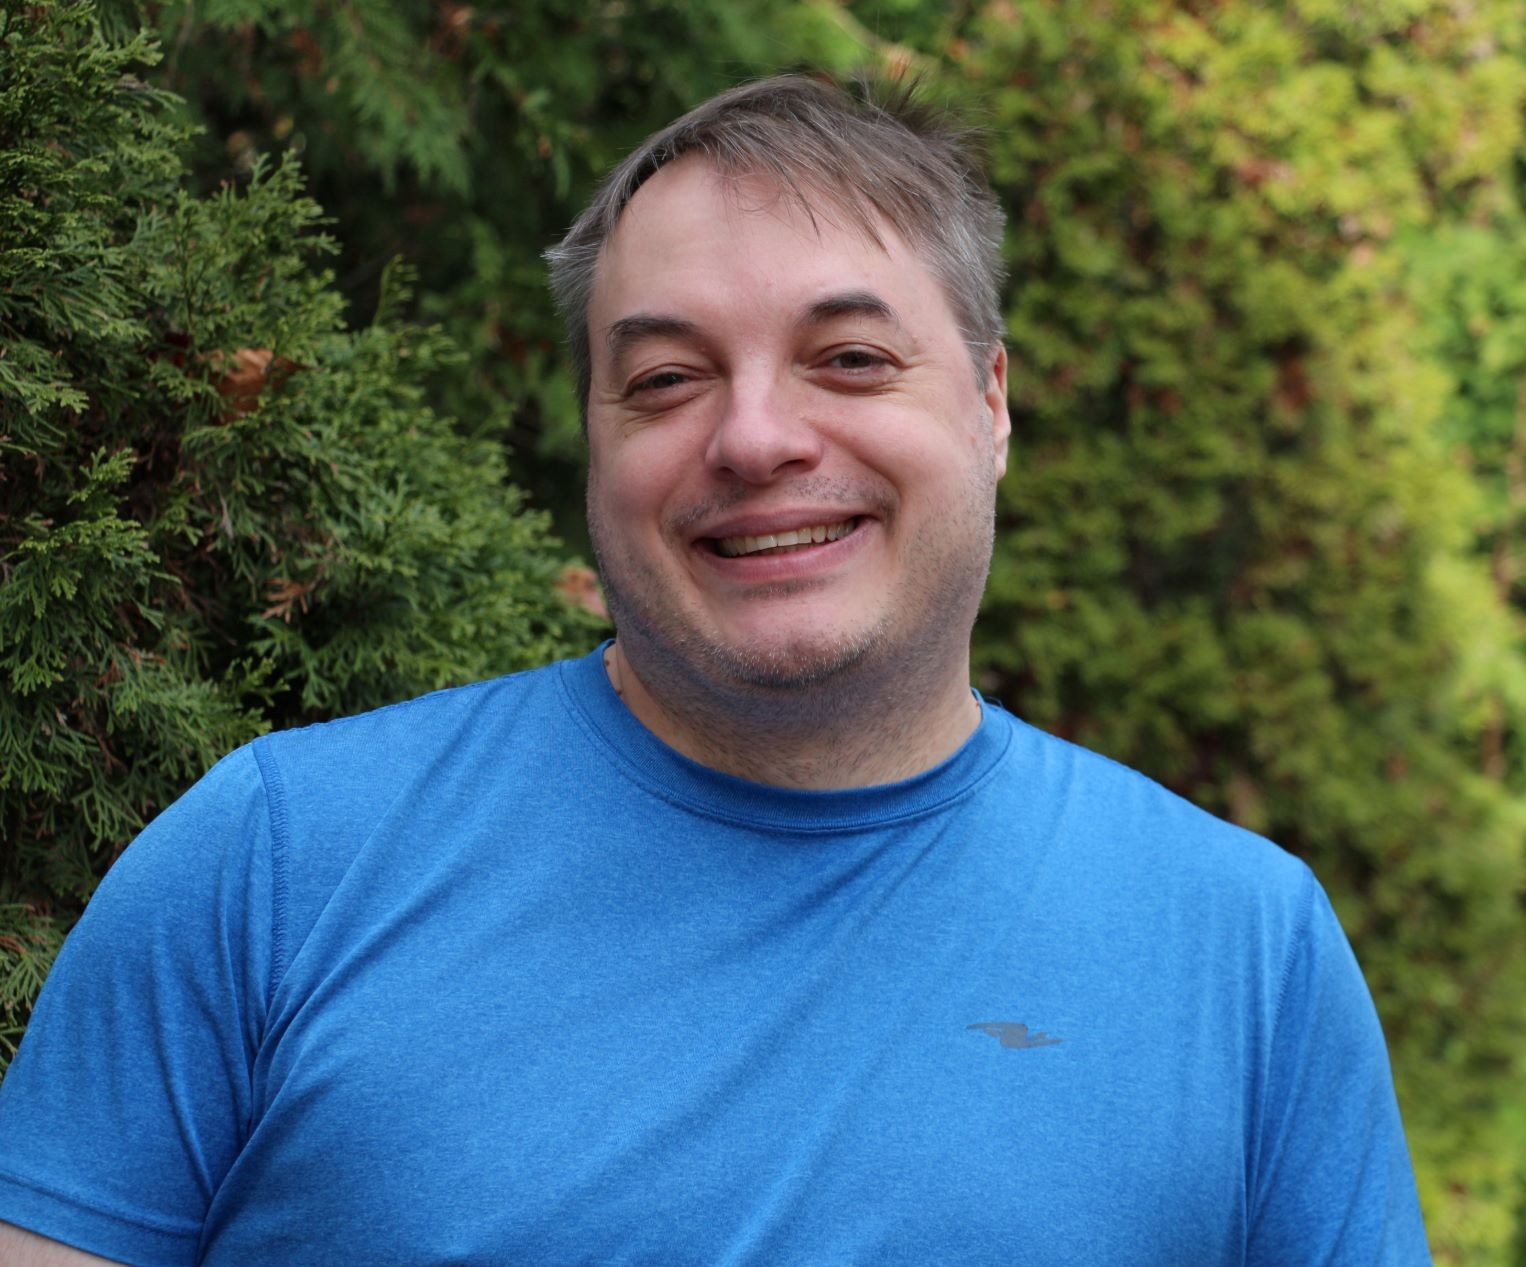 A man in a blue shirt smiling outside in front of green shrubs.